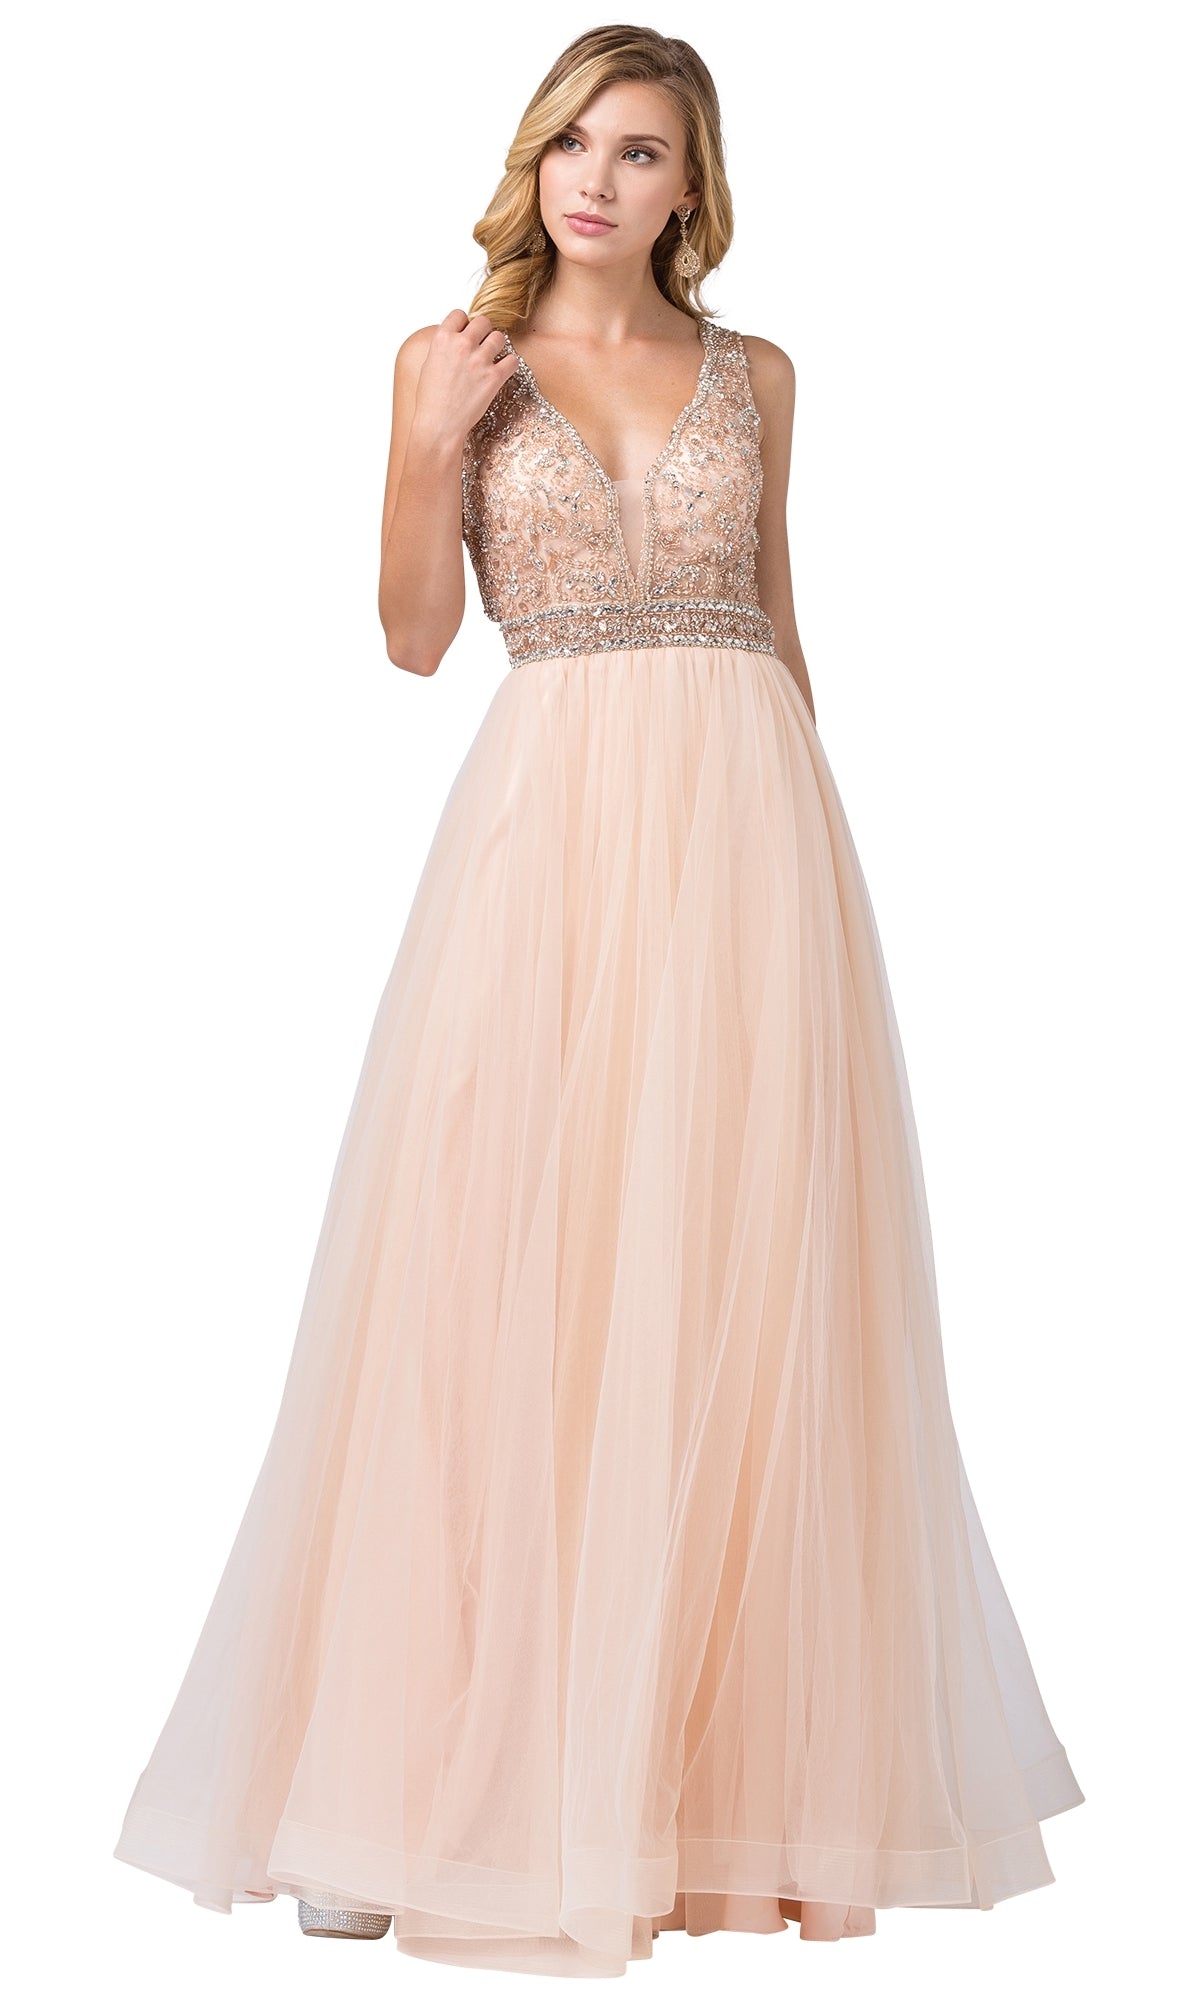 Champagne Formal Ball Gown with Embellished Sheer Bodice